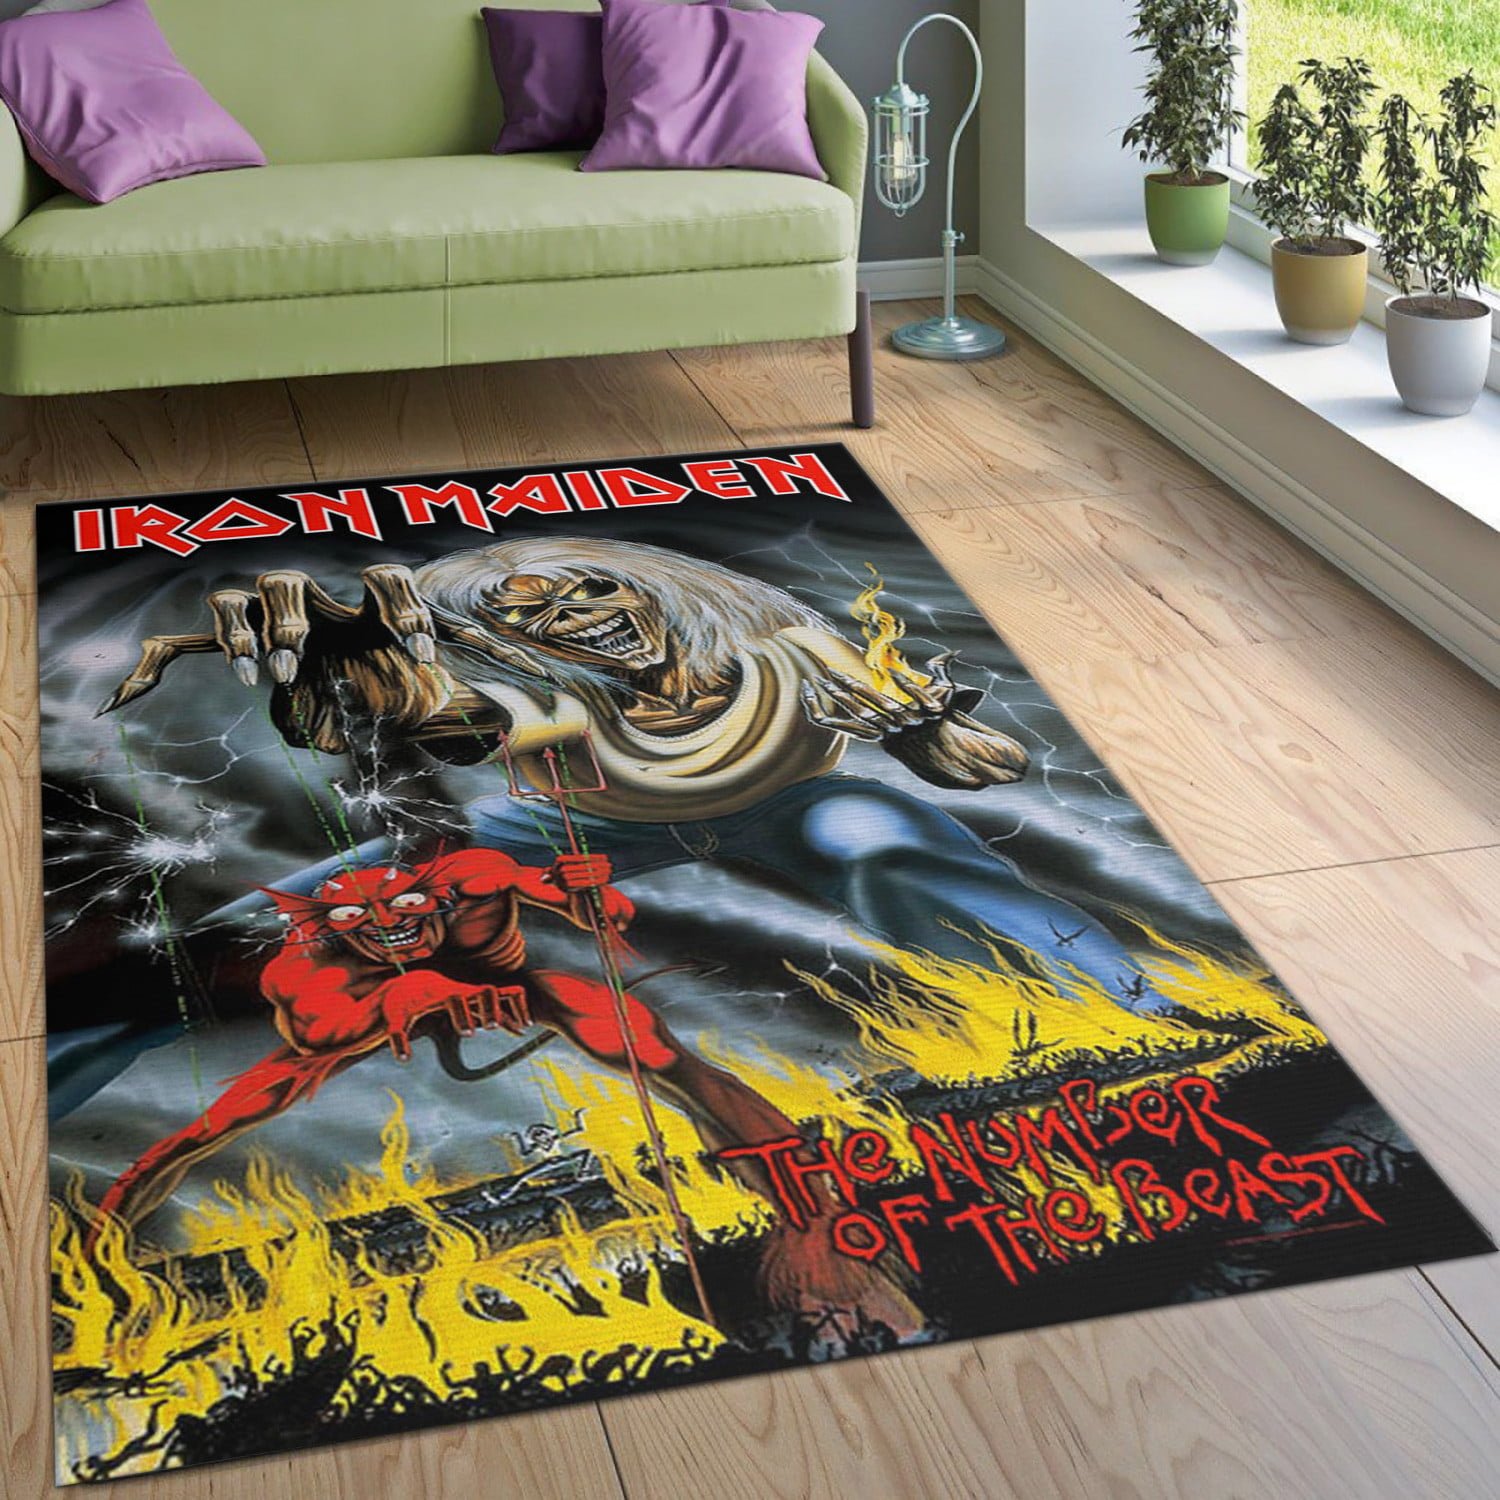 Iron Maiden Area Rug Rugs For Living Room Rug Home Decor